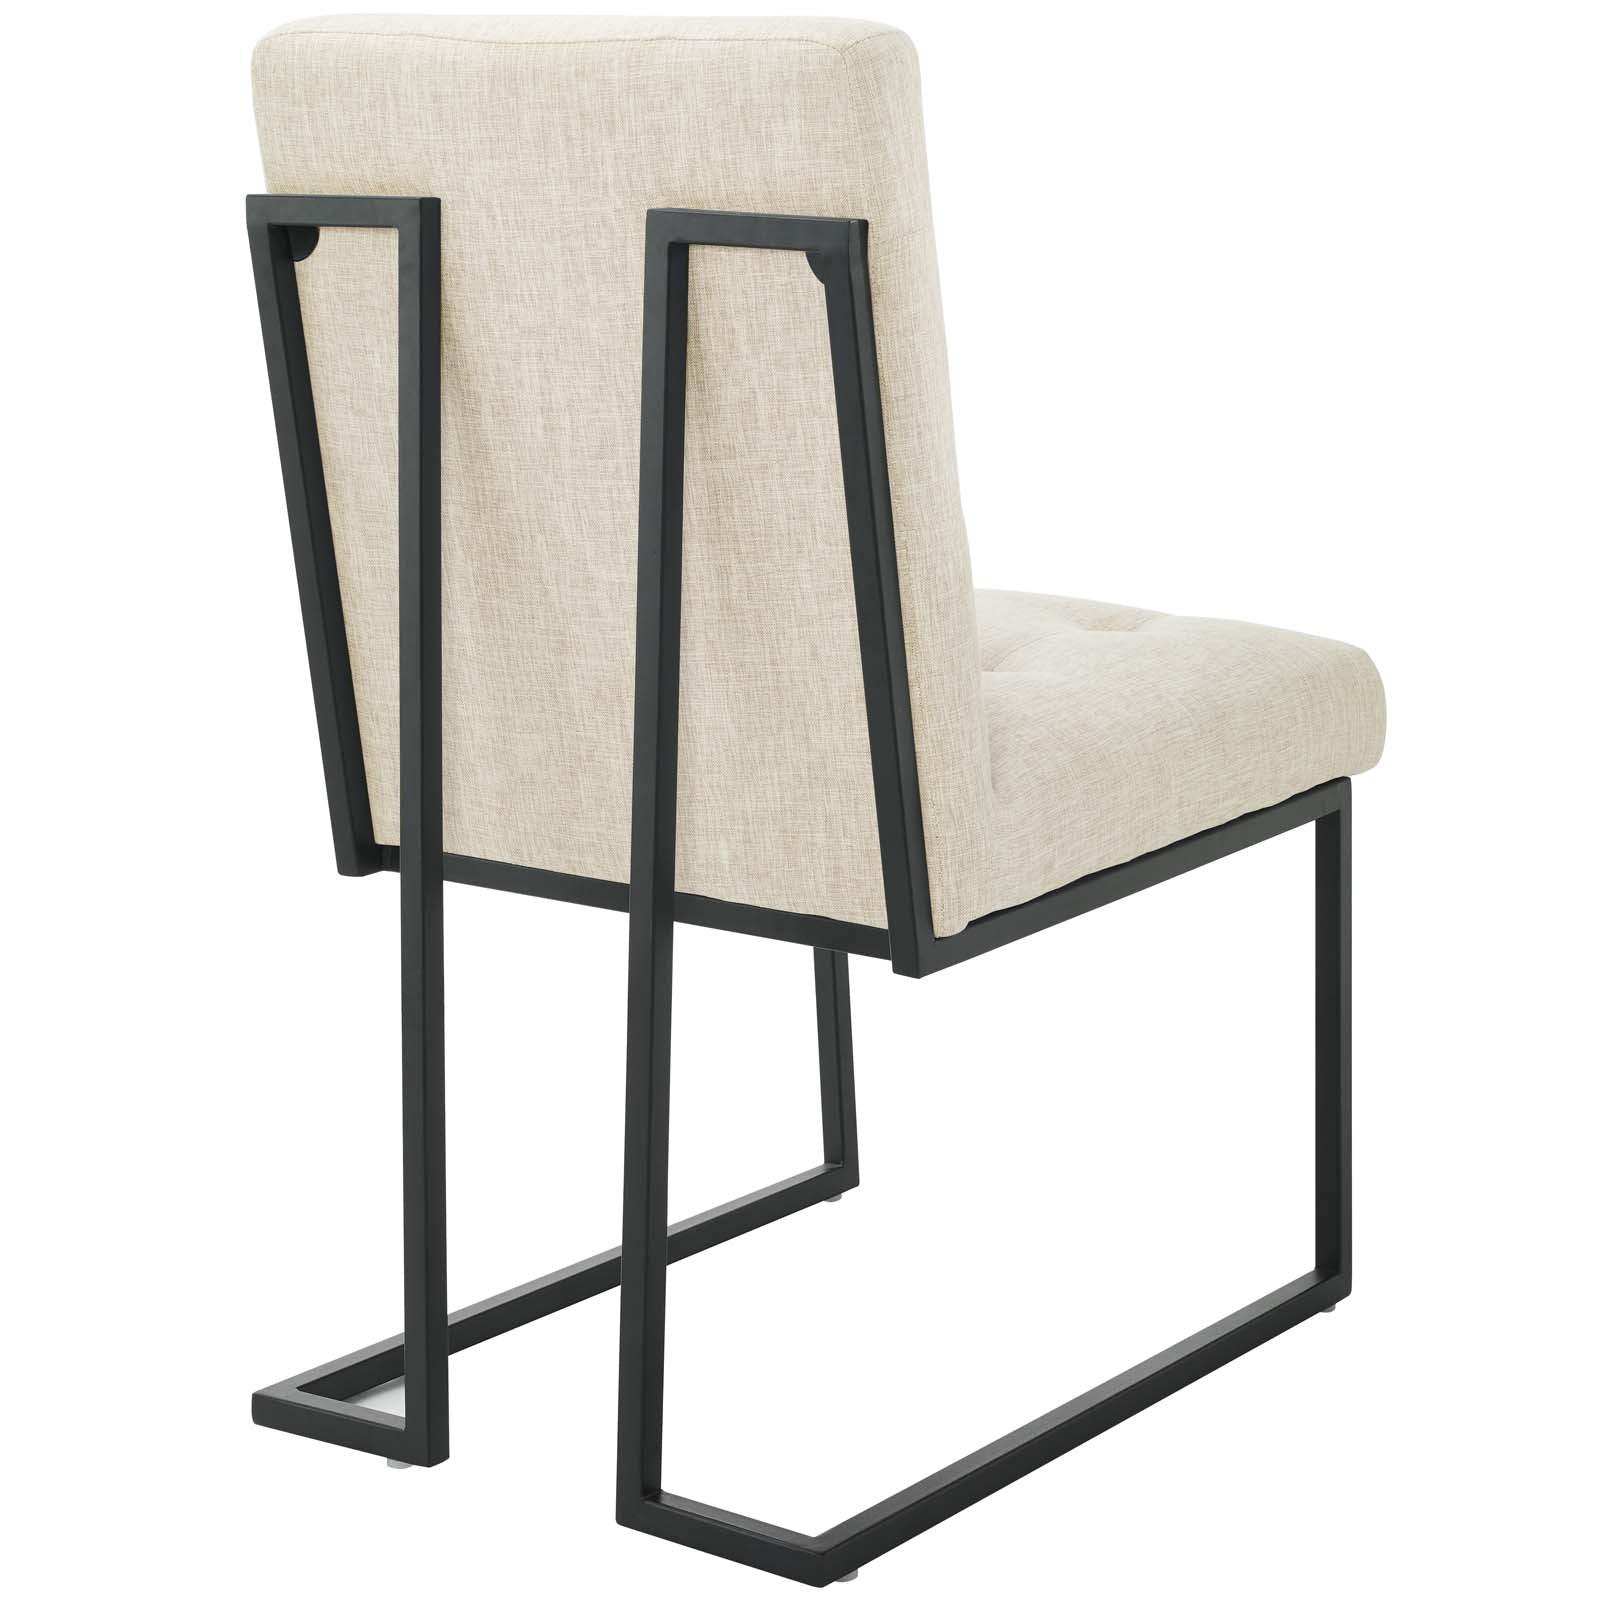 Modway Dining Chairs - Privy Black Stainless Steel Upholstered Fabric Dining Chair Set of 2 Black Beige